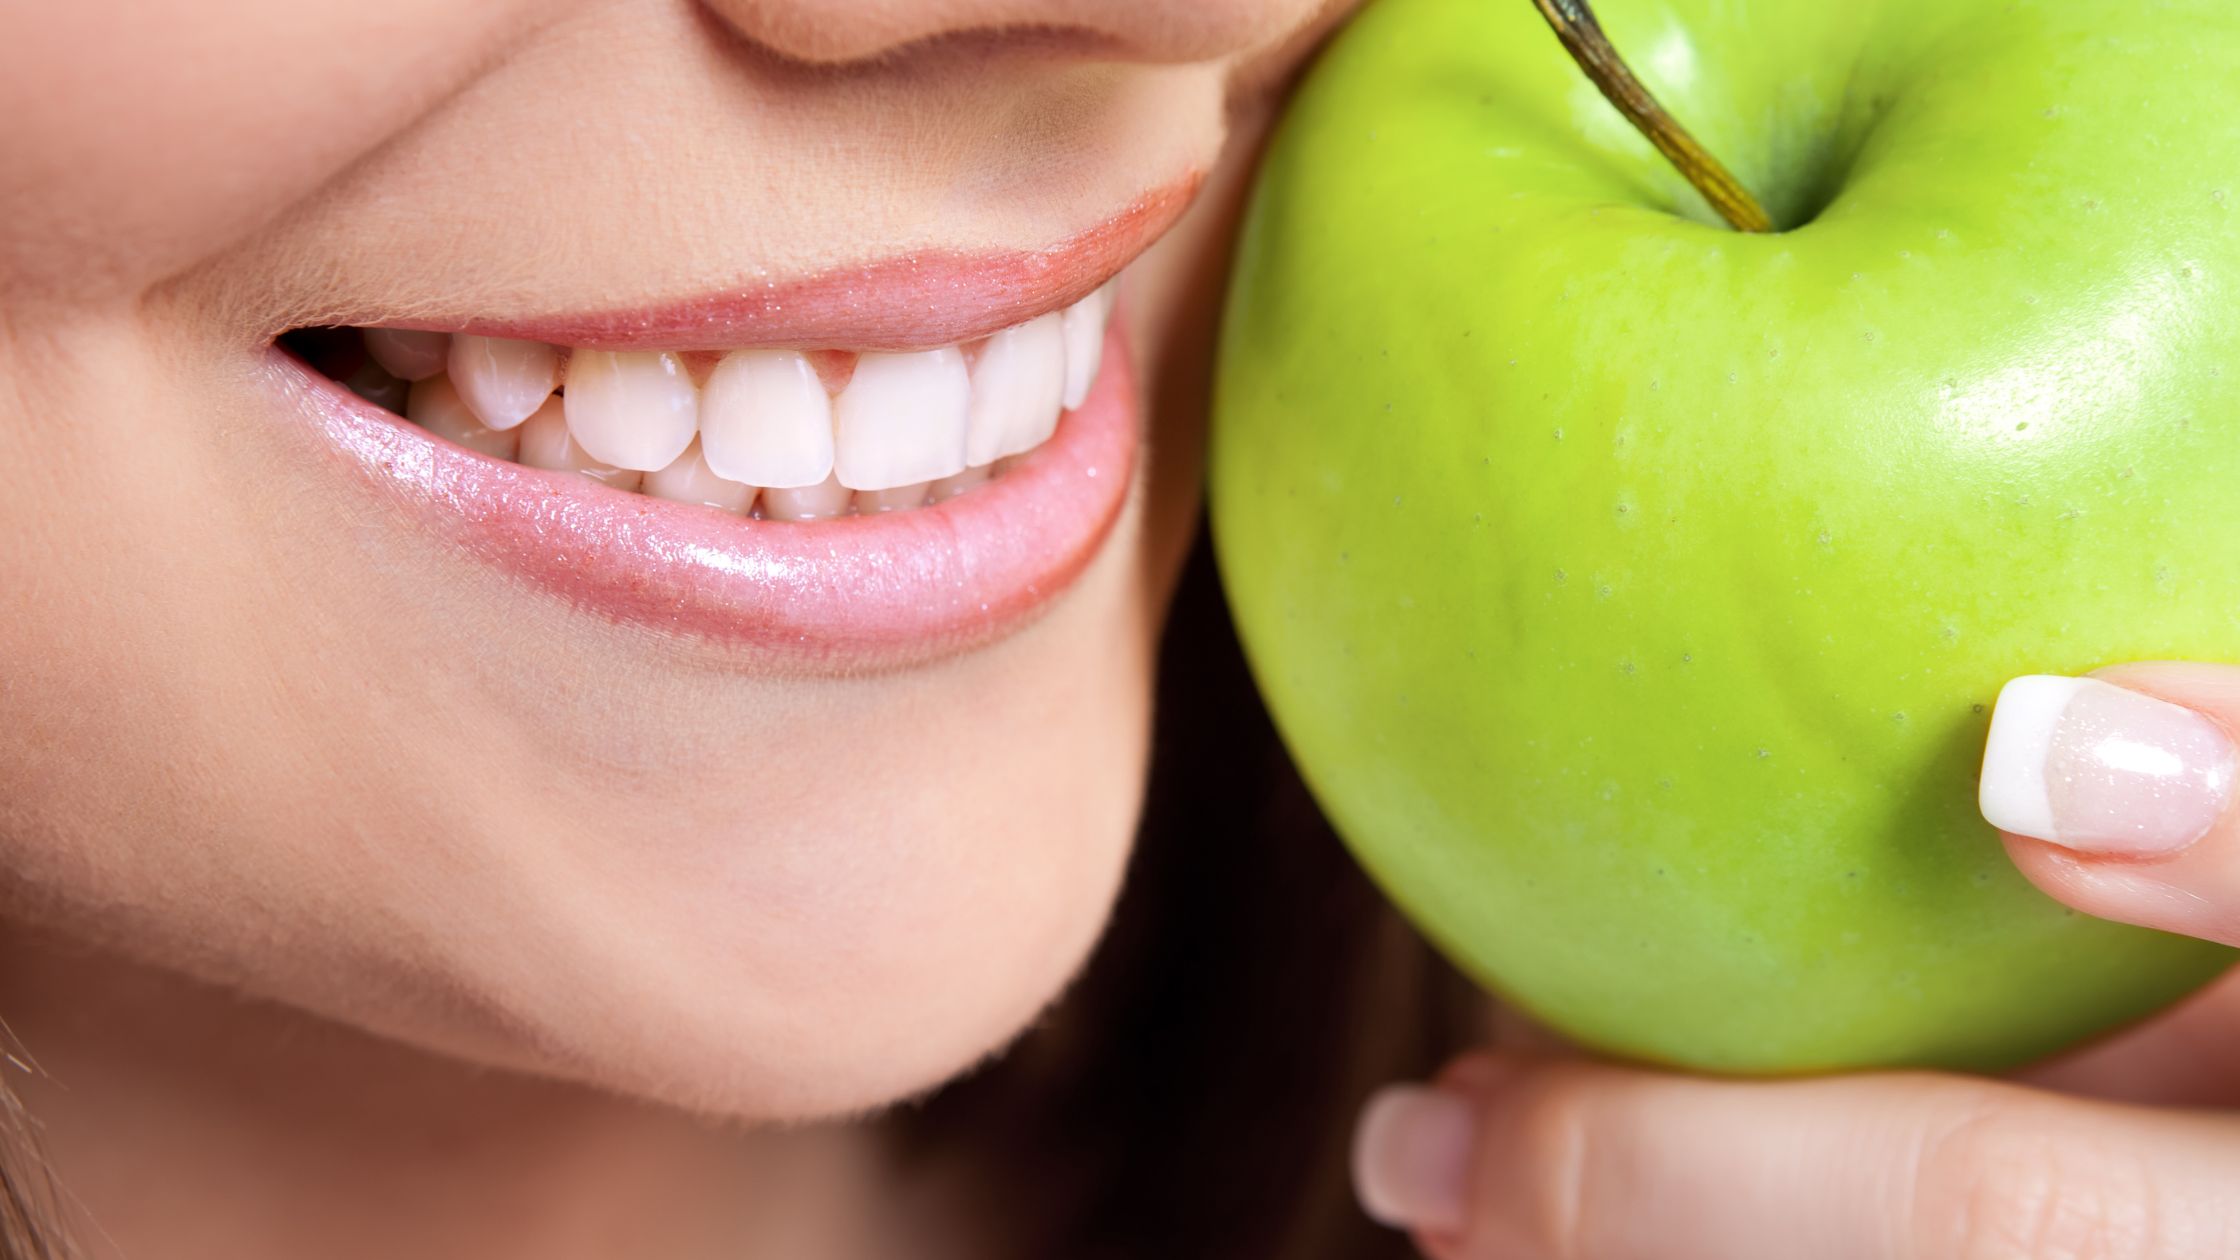 Foods that are good for your teeth